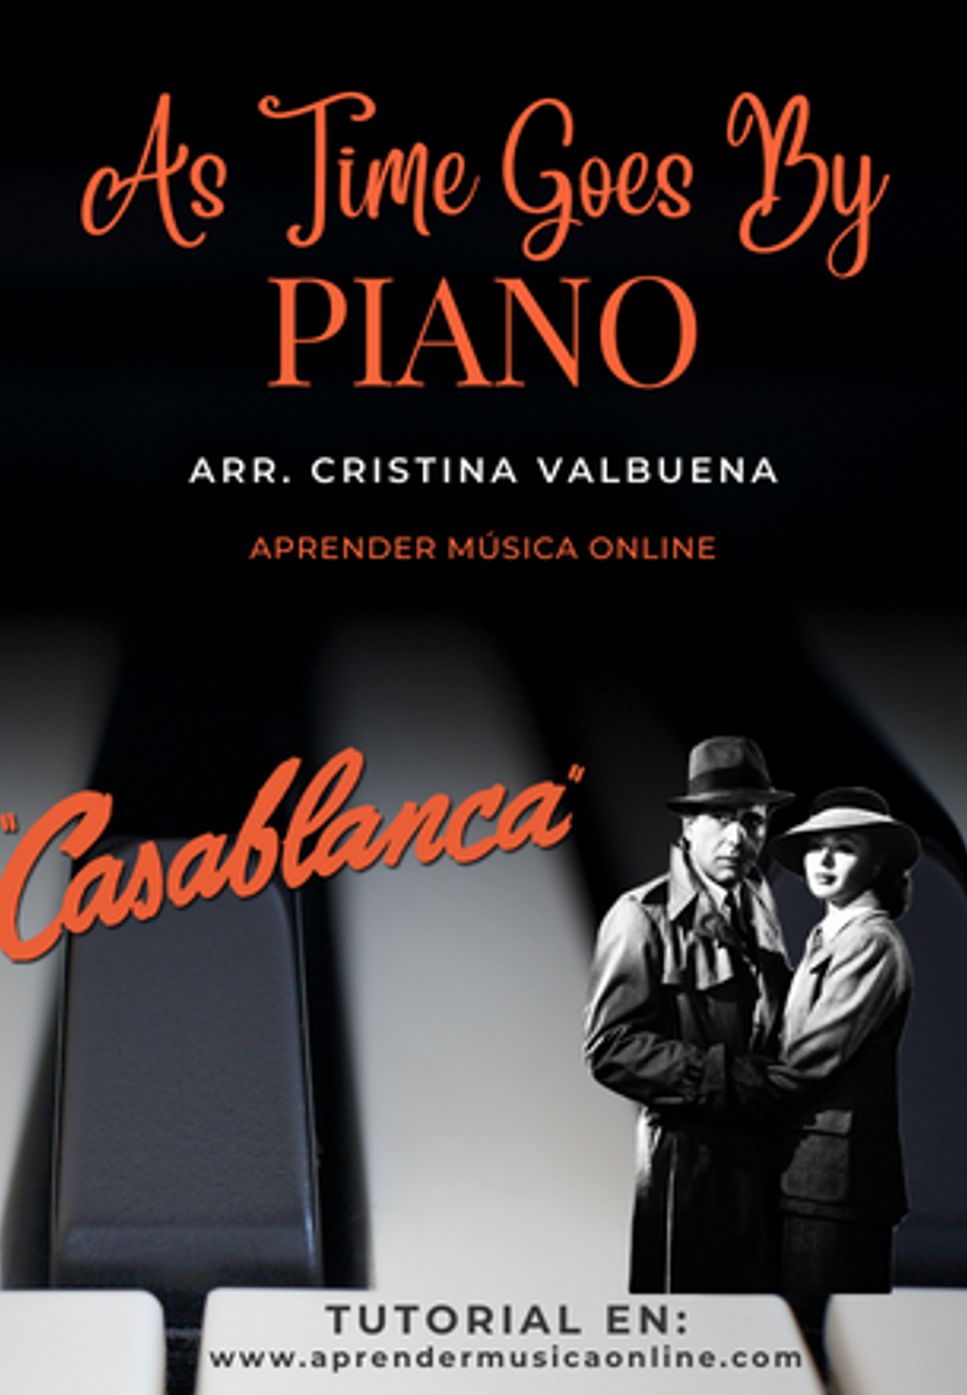 Herman Hupfeld - As Time Goes By - B.S.O. Casablanca by Cristina Valbuena